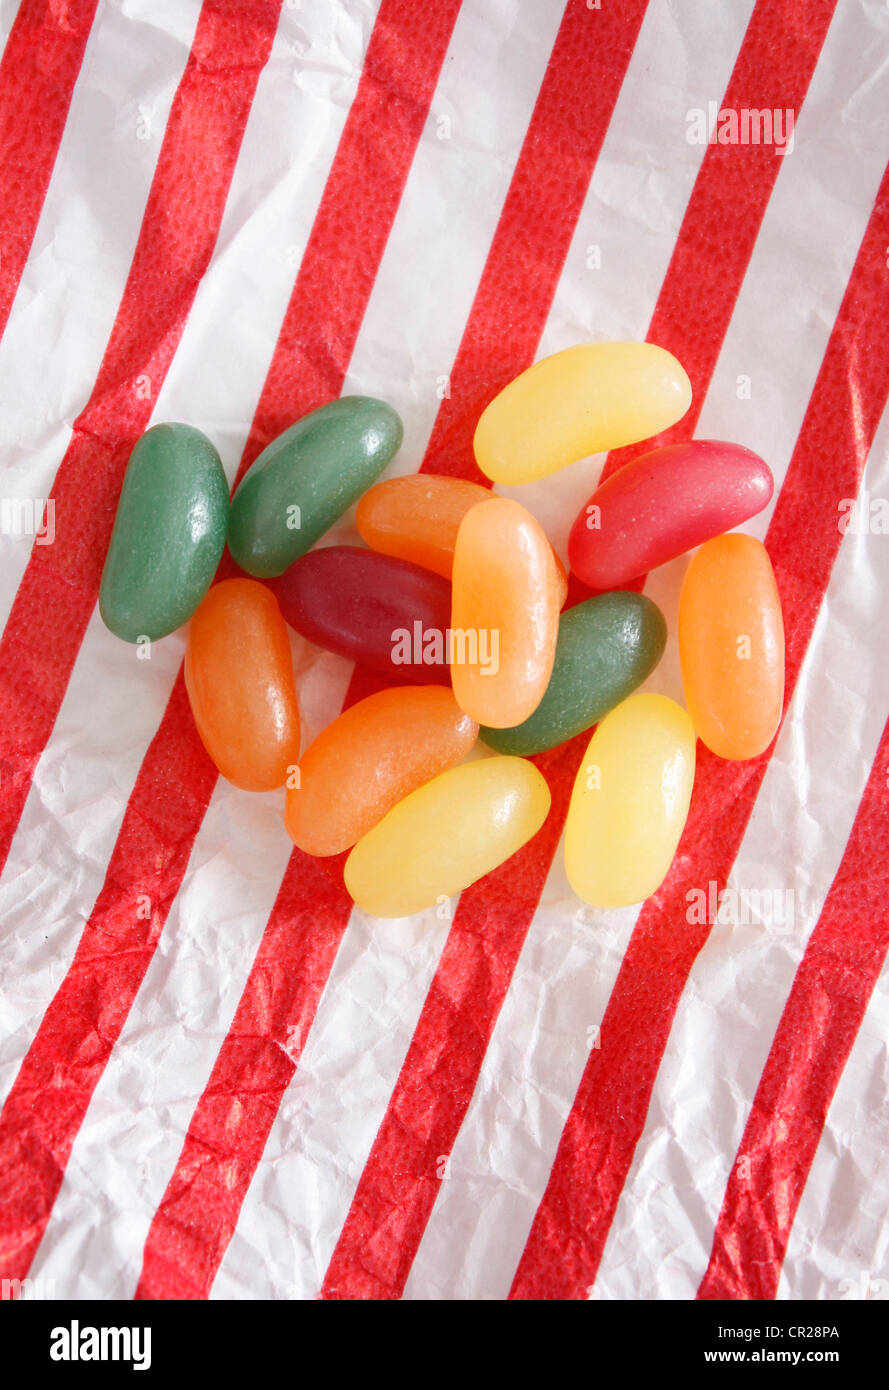 Chewy candy Stock Photo